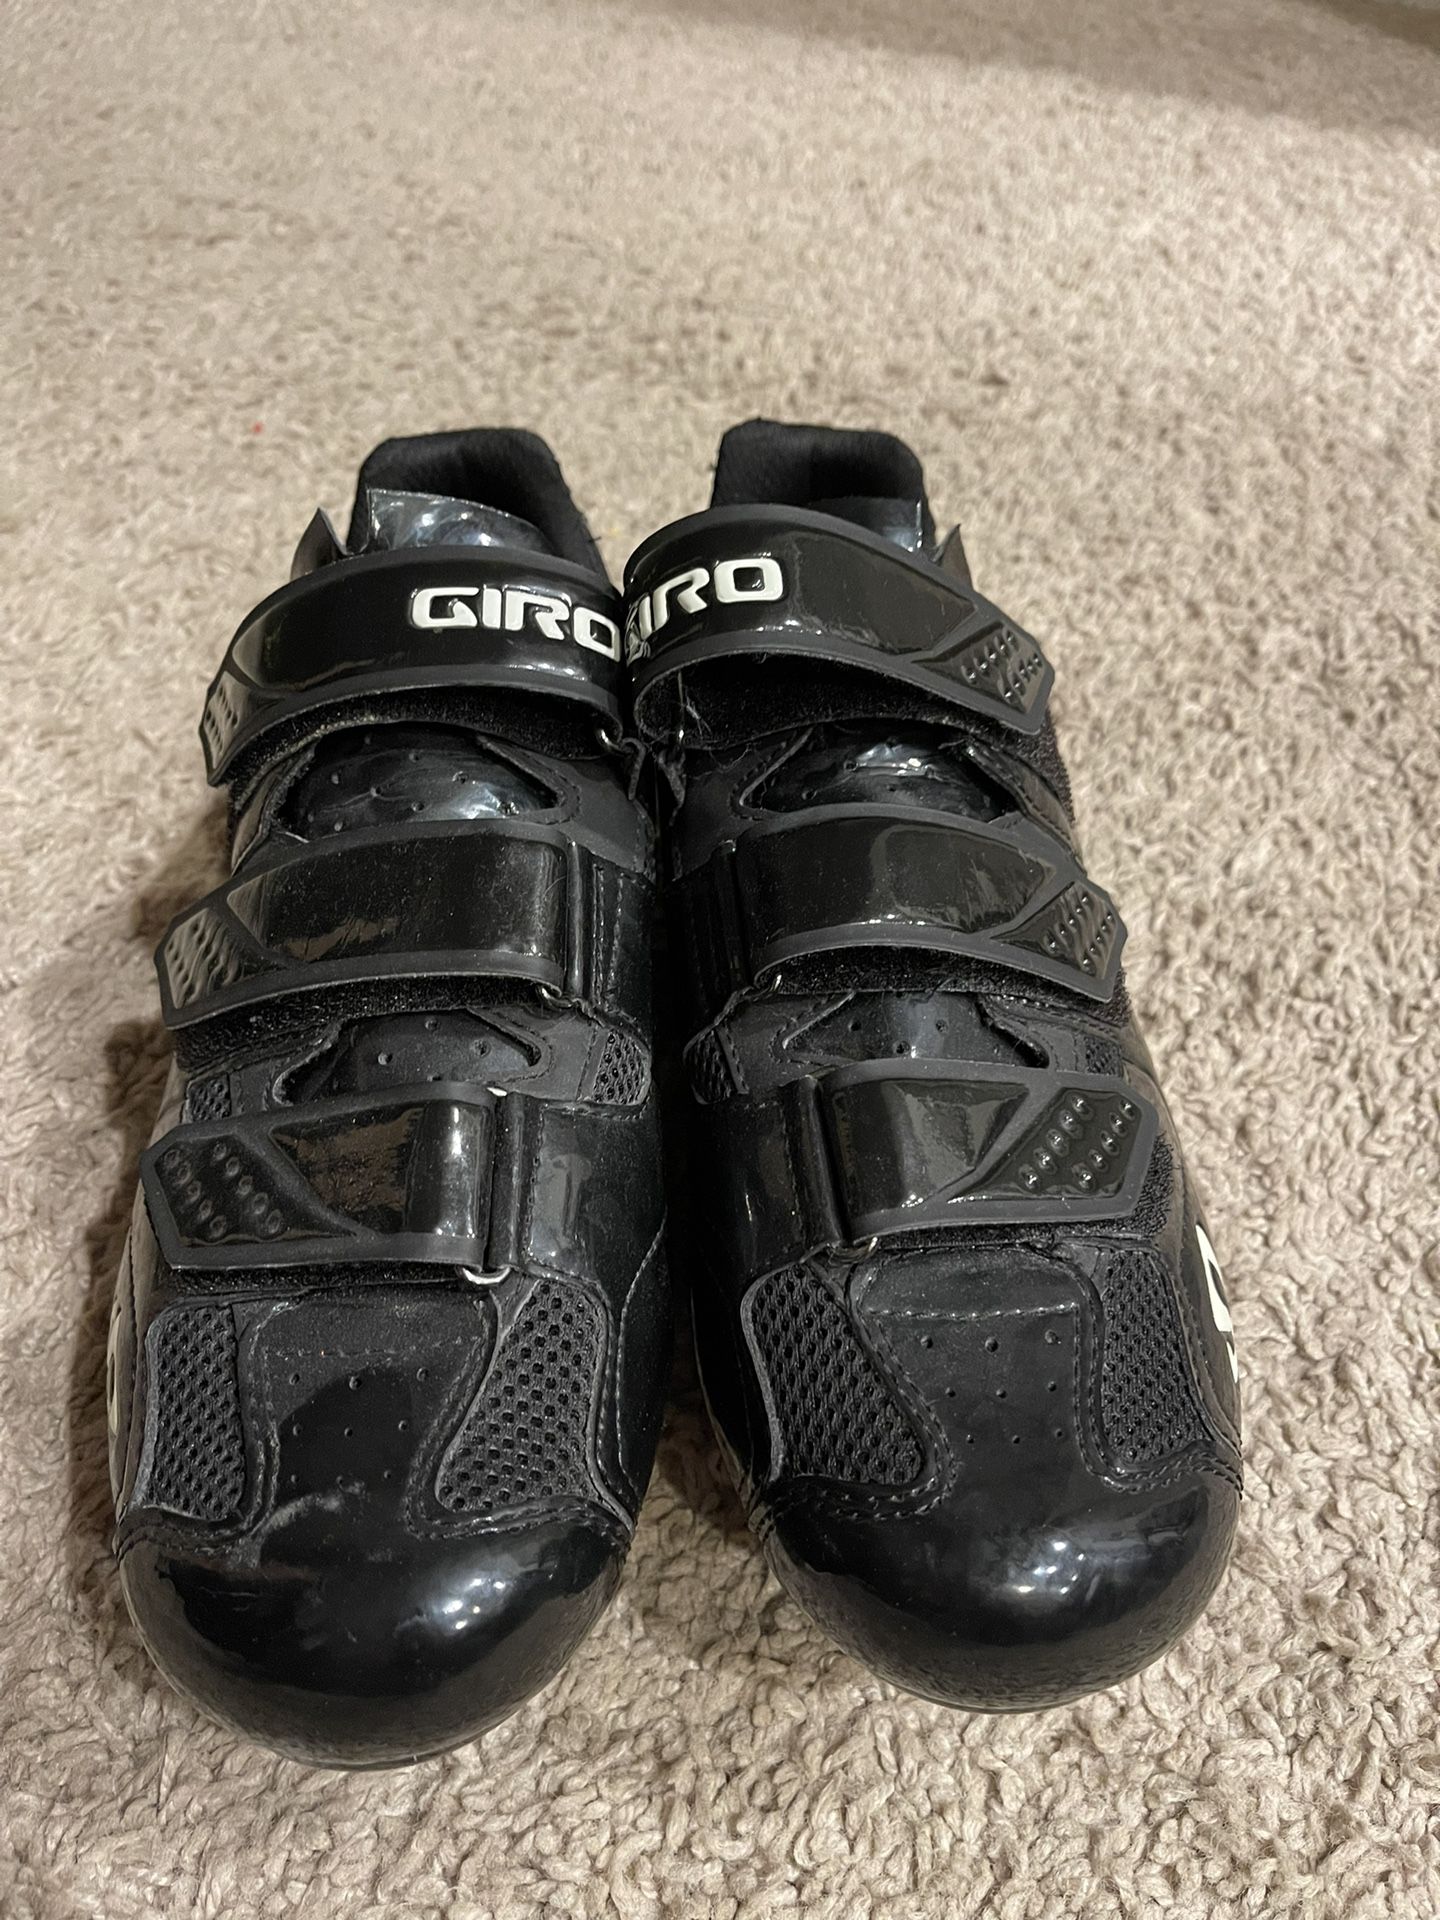 Like-New Men’s Giro Cycling Shoes with clips for Peloton - size 9.5